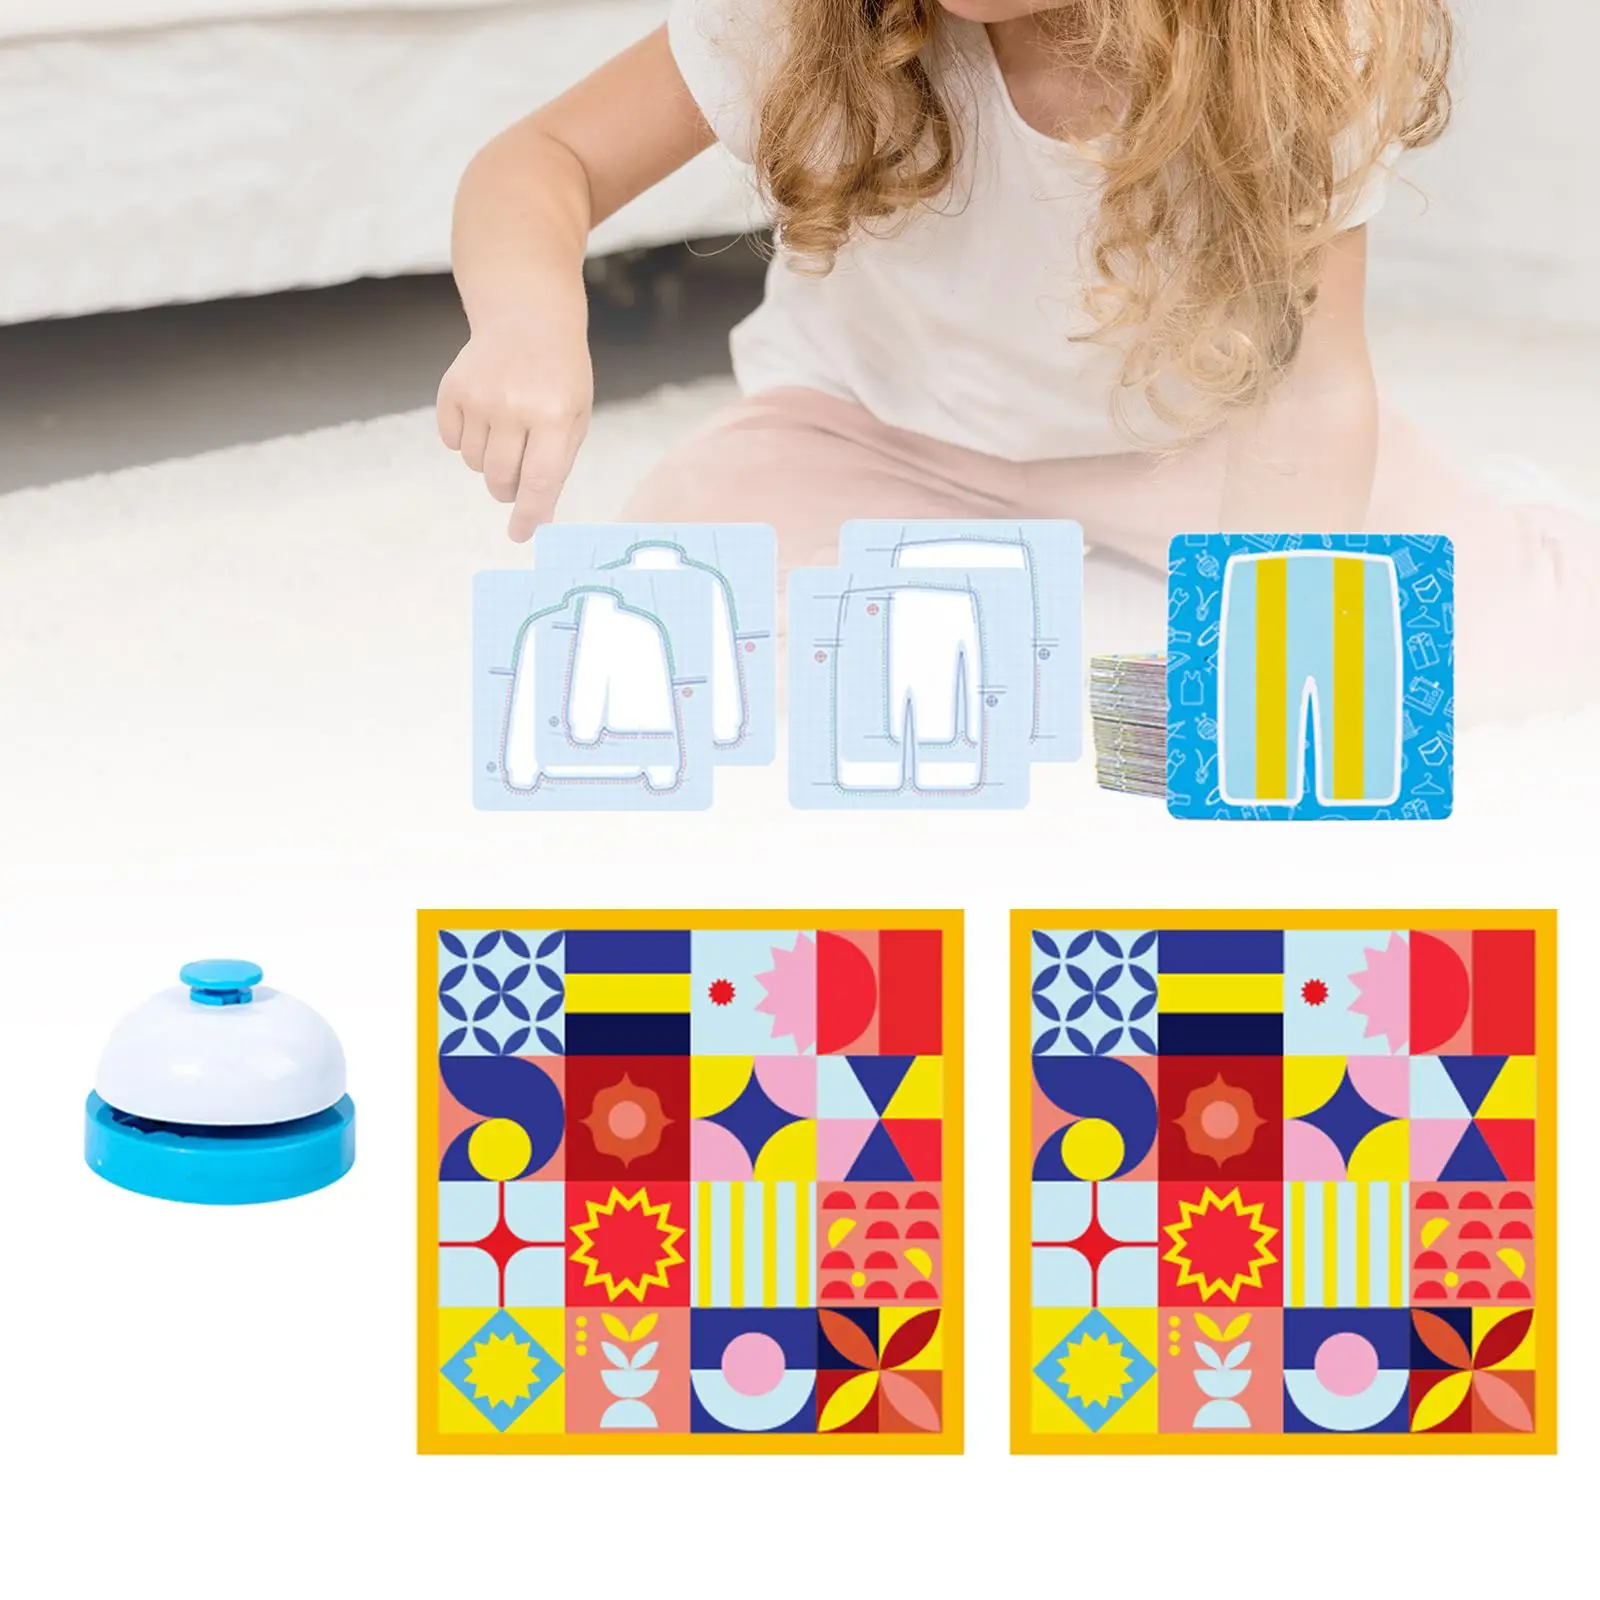 Tailor Sensory Toy Shape Matching Puzzle Clothes Matching Shape Toy Activity for Preschool Children Birthday Gift